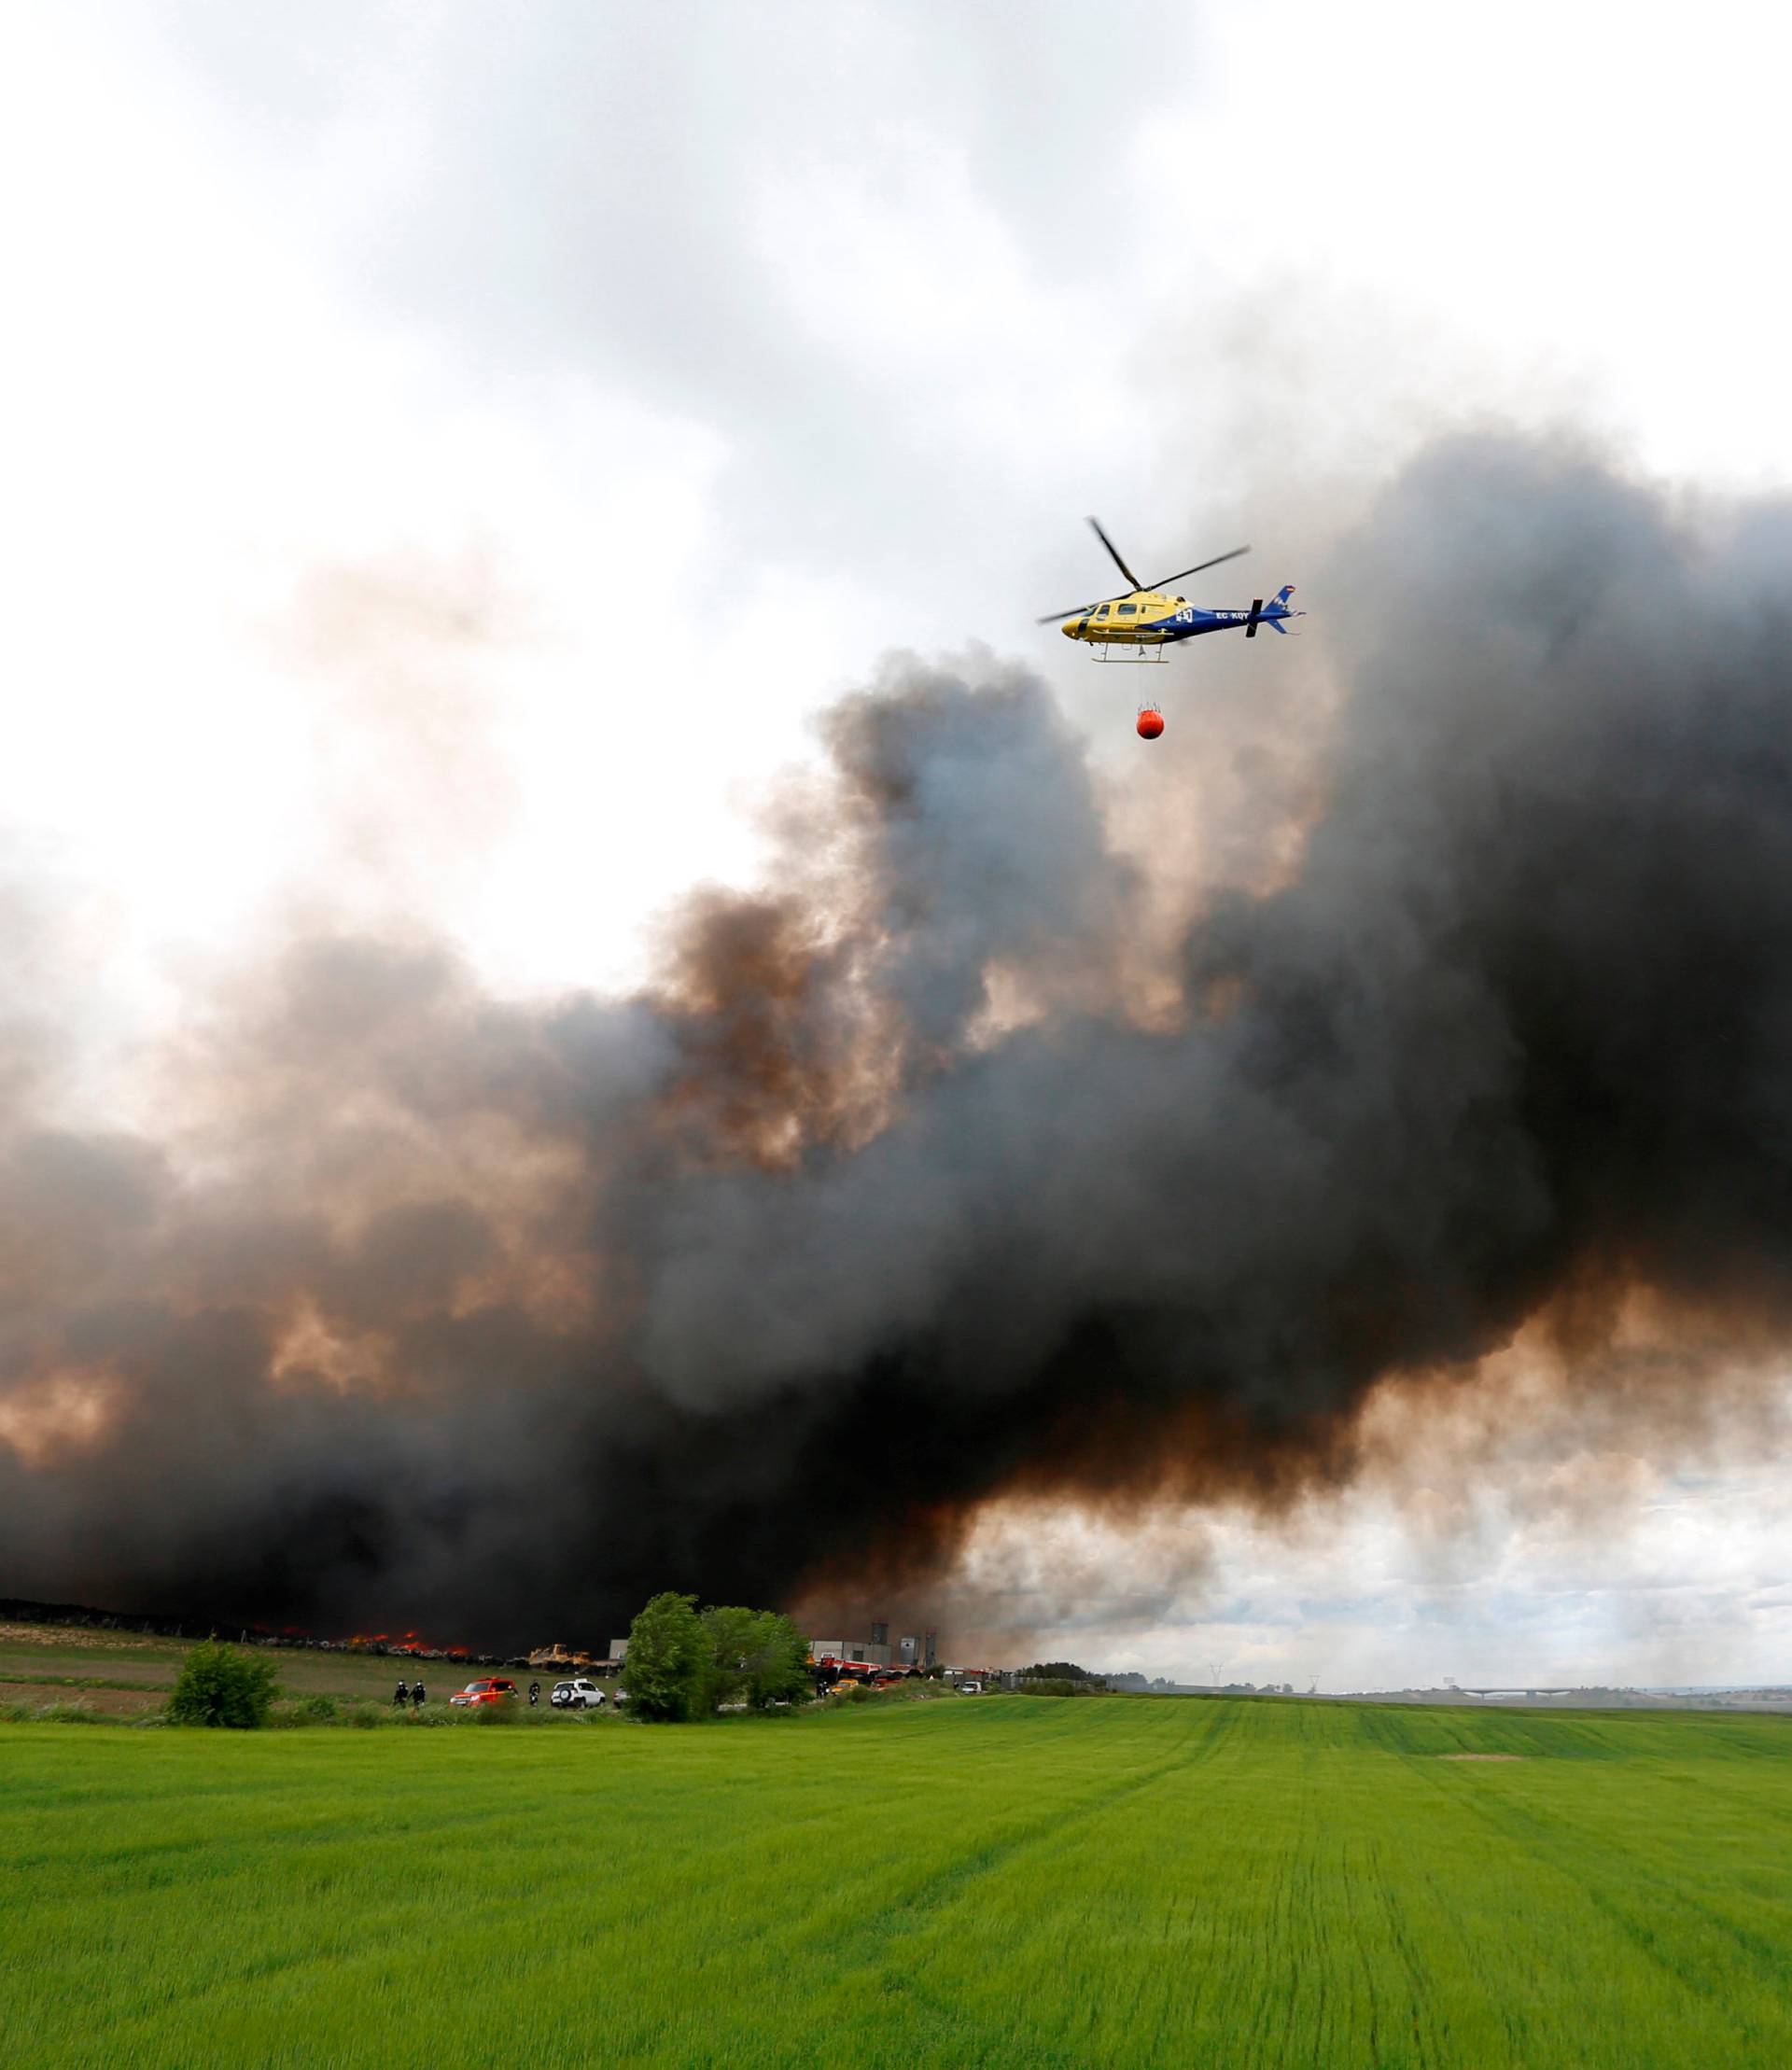 An helicopter prepares to throw water over a fire at a tire dump near a residential development in Sesena